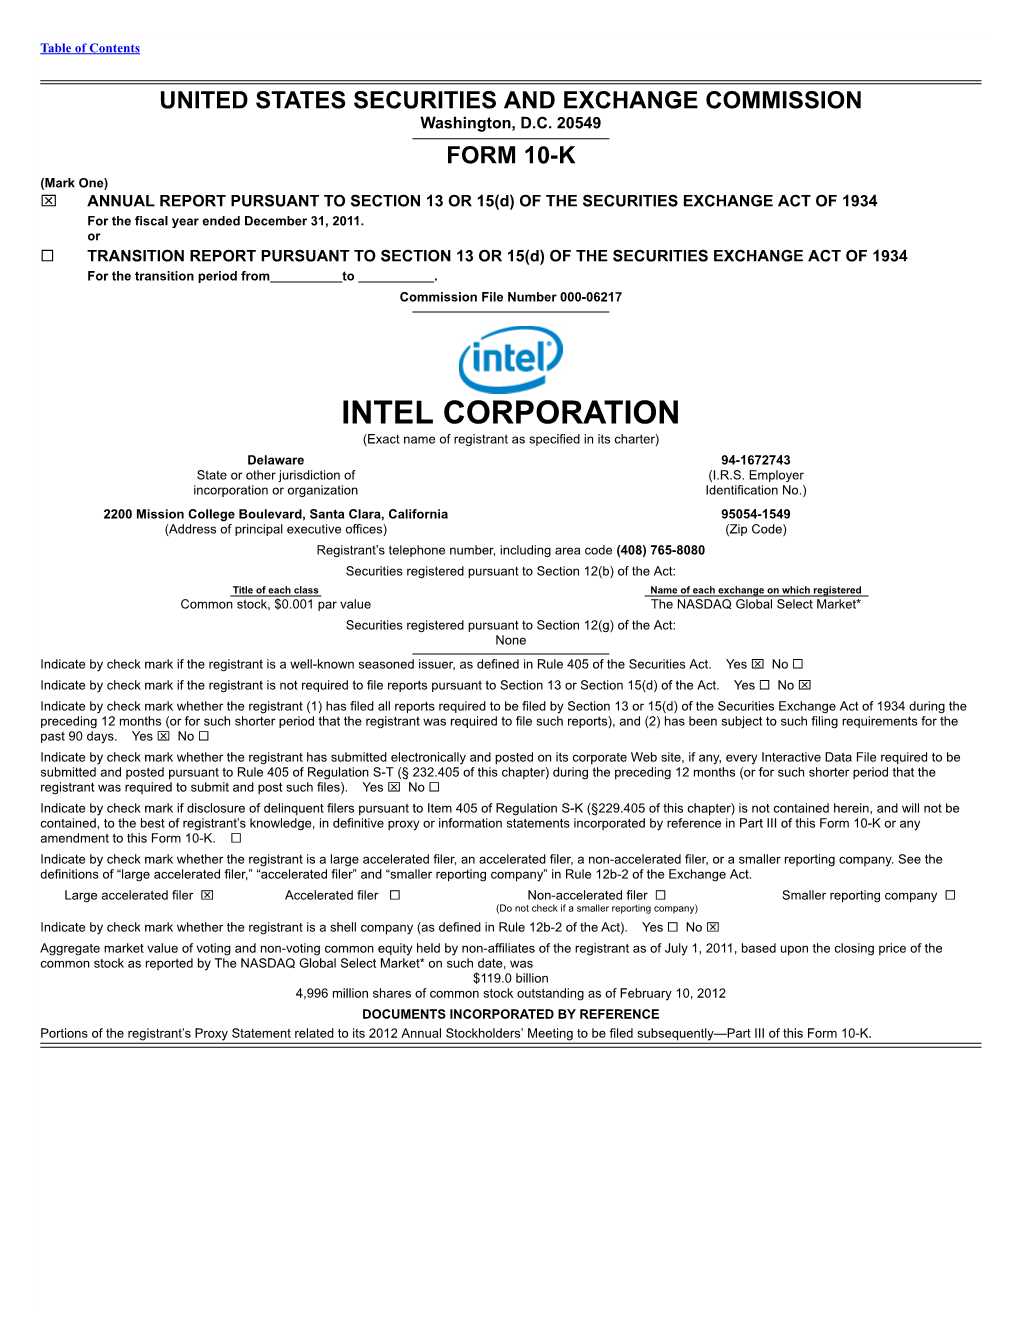 INTEL CORPORATION (Exact Name of Registrant As Specified in Its Charter)